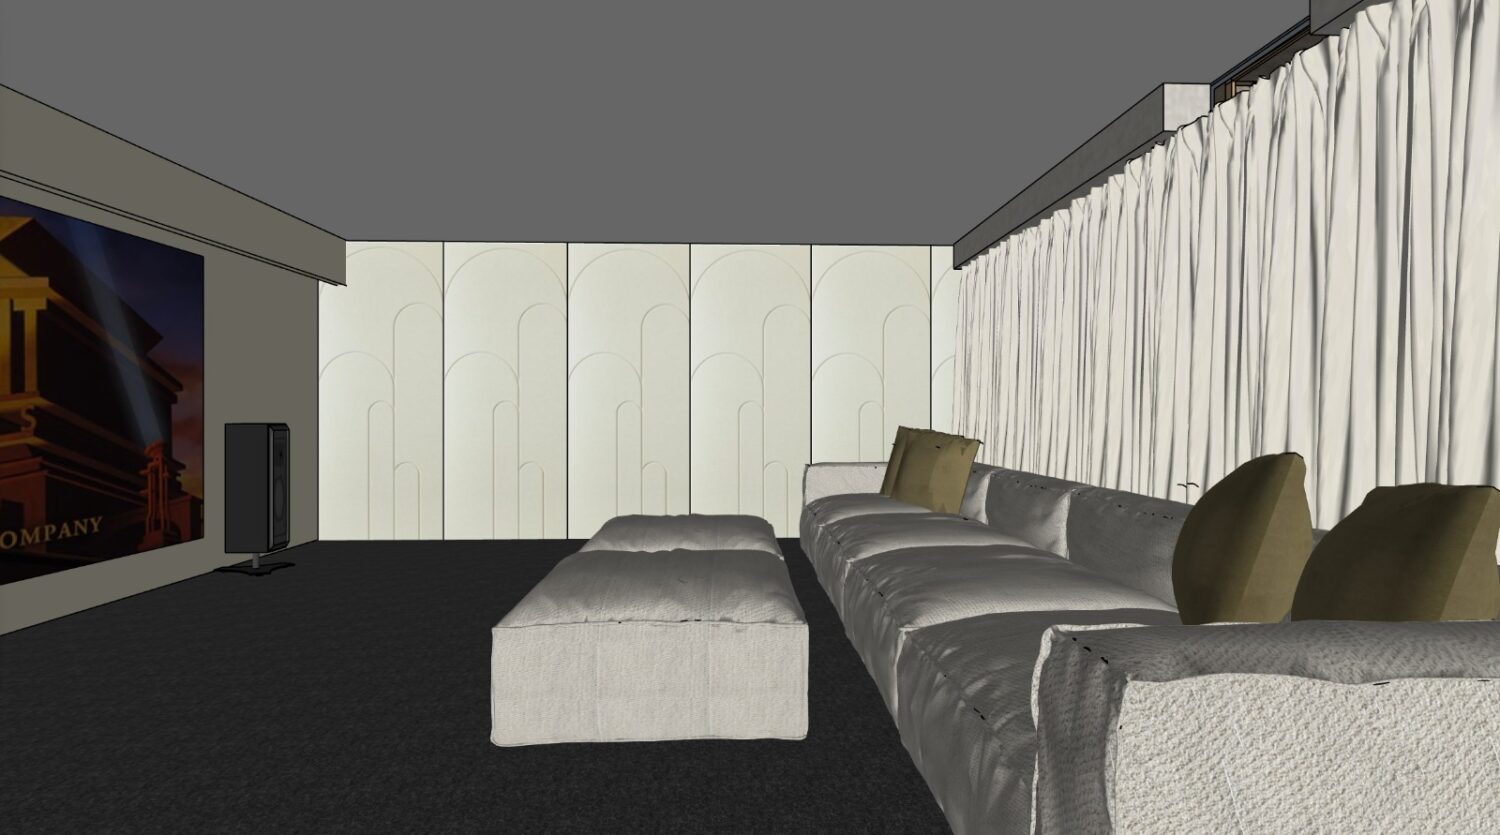 A 3D visualisation of how the cinema room will look when completed. This is done via Sketch Up.